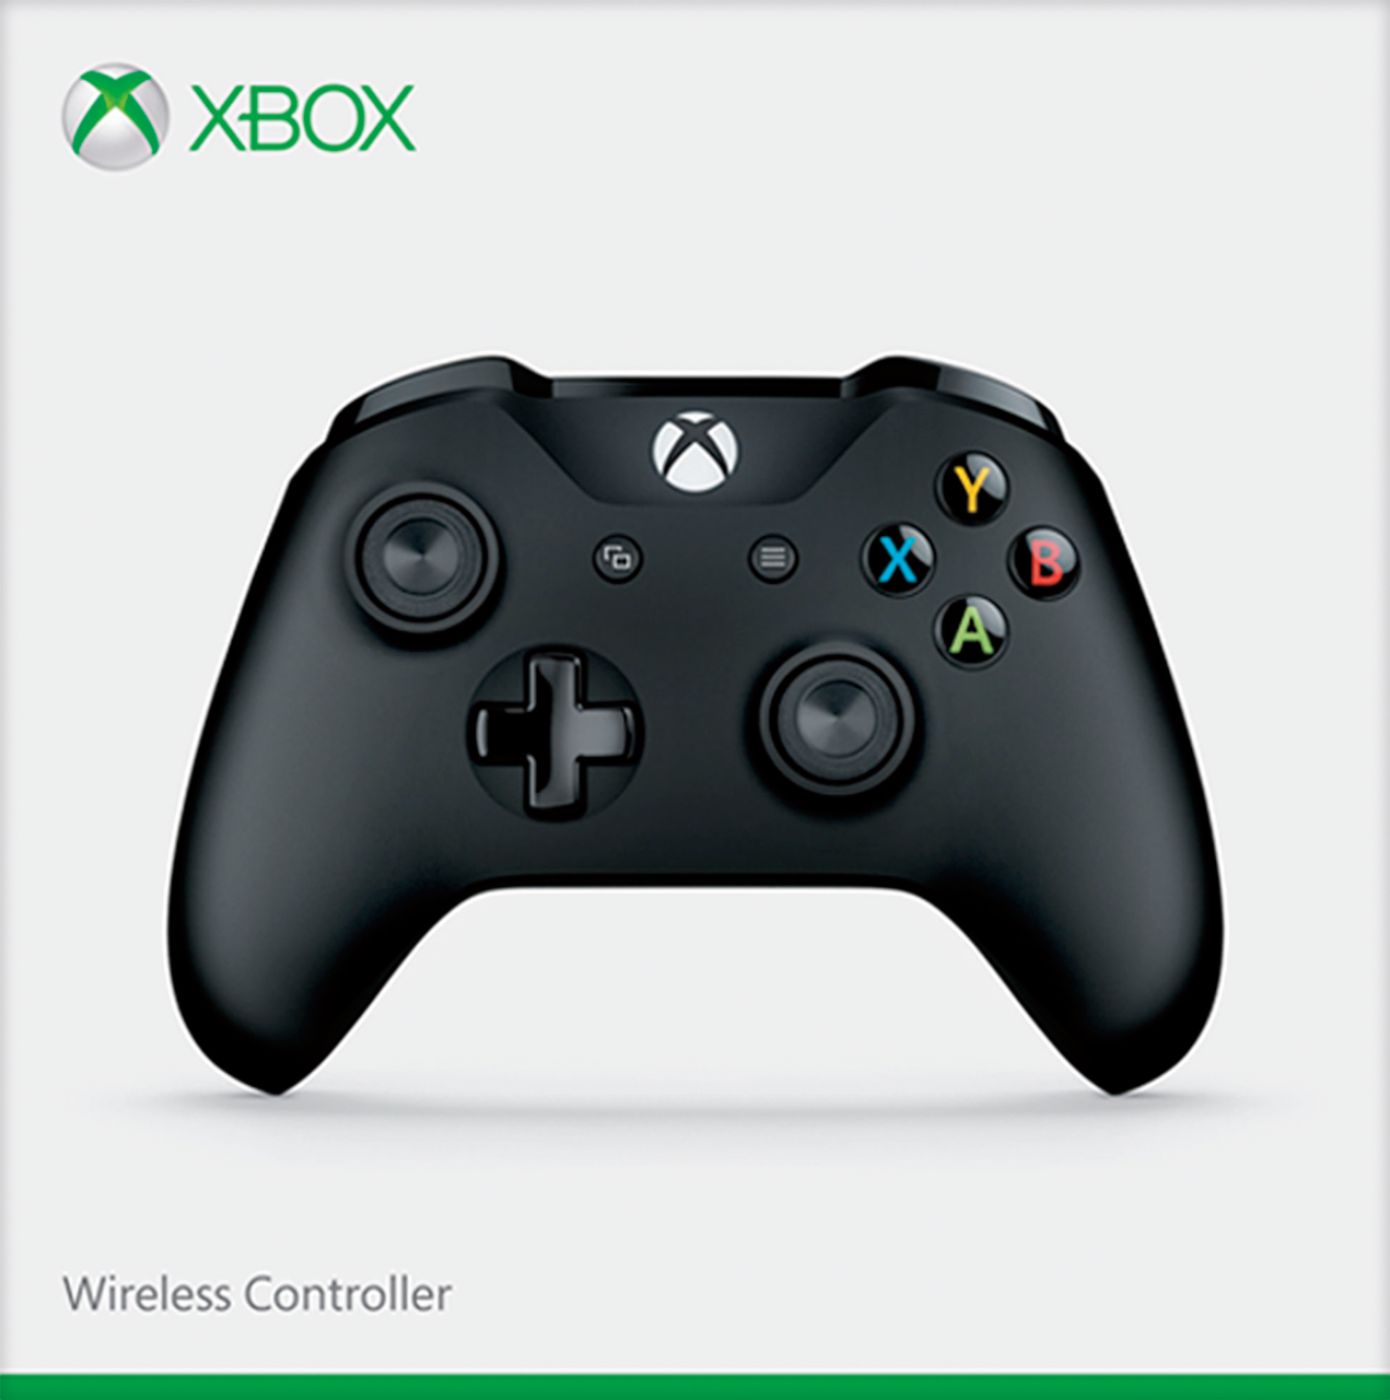 Microsoft Wireless Controller for Xbox Series X/S - Carbon Black  889842611588